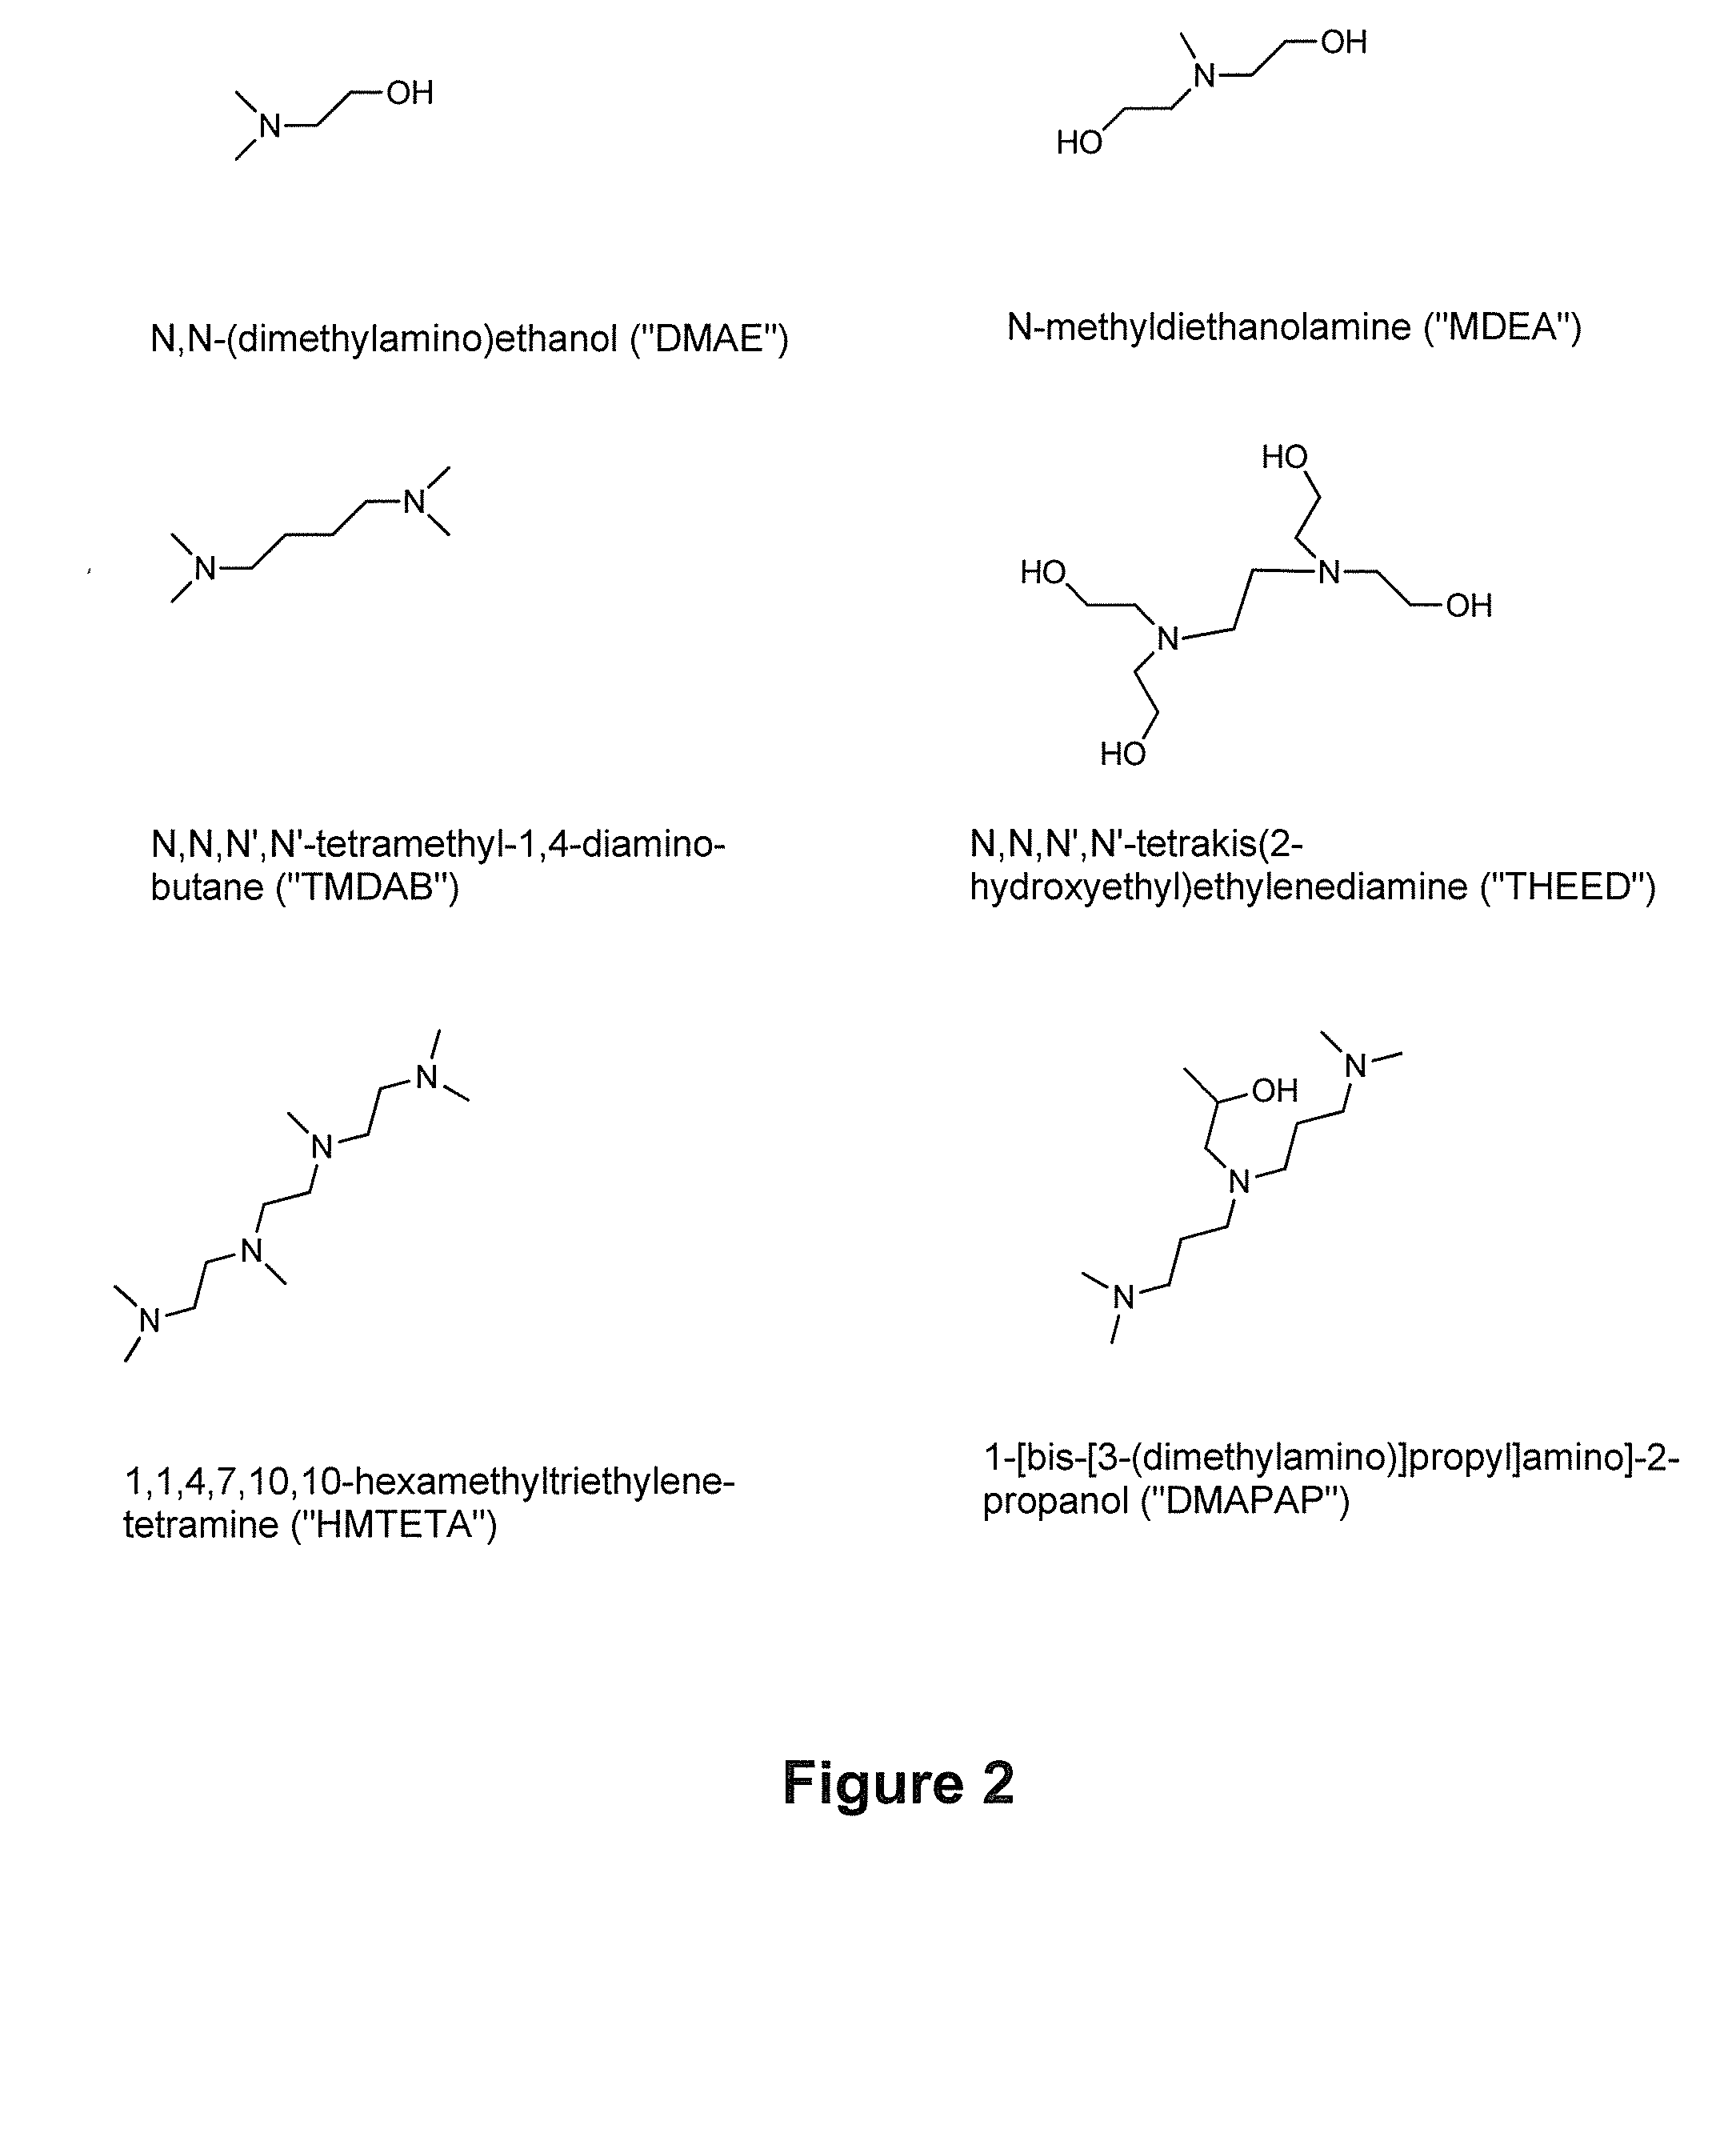 Systems and Methods for Use of Water with Switchable Ionic Strength